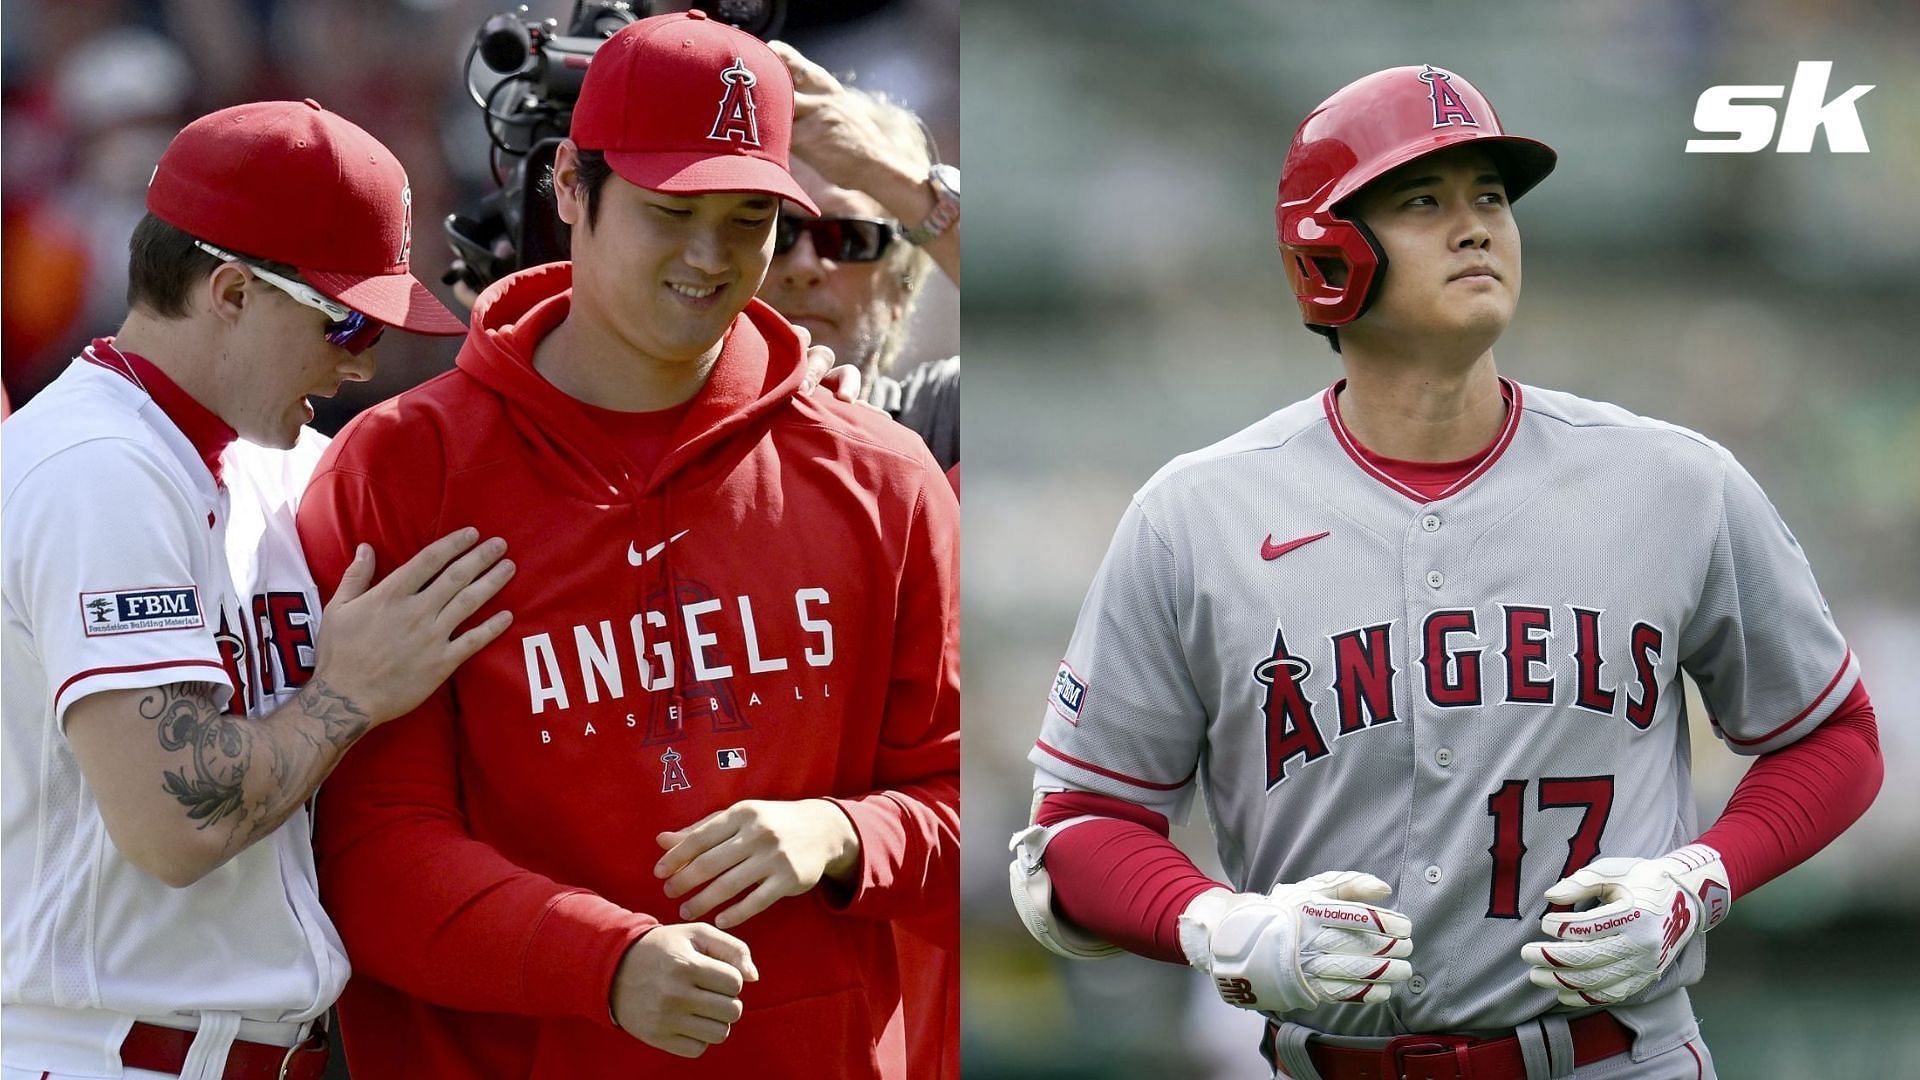 MLB fans have celebrated Shohei Ohtani winning the second Silver Slugger Award of his career